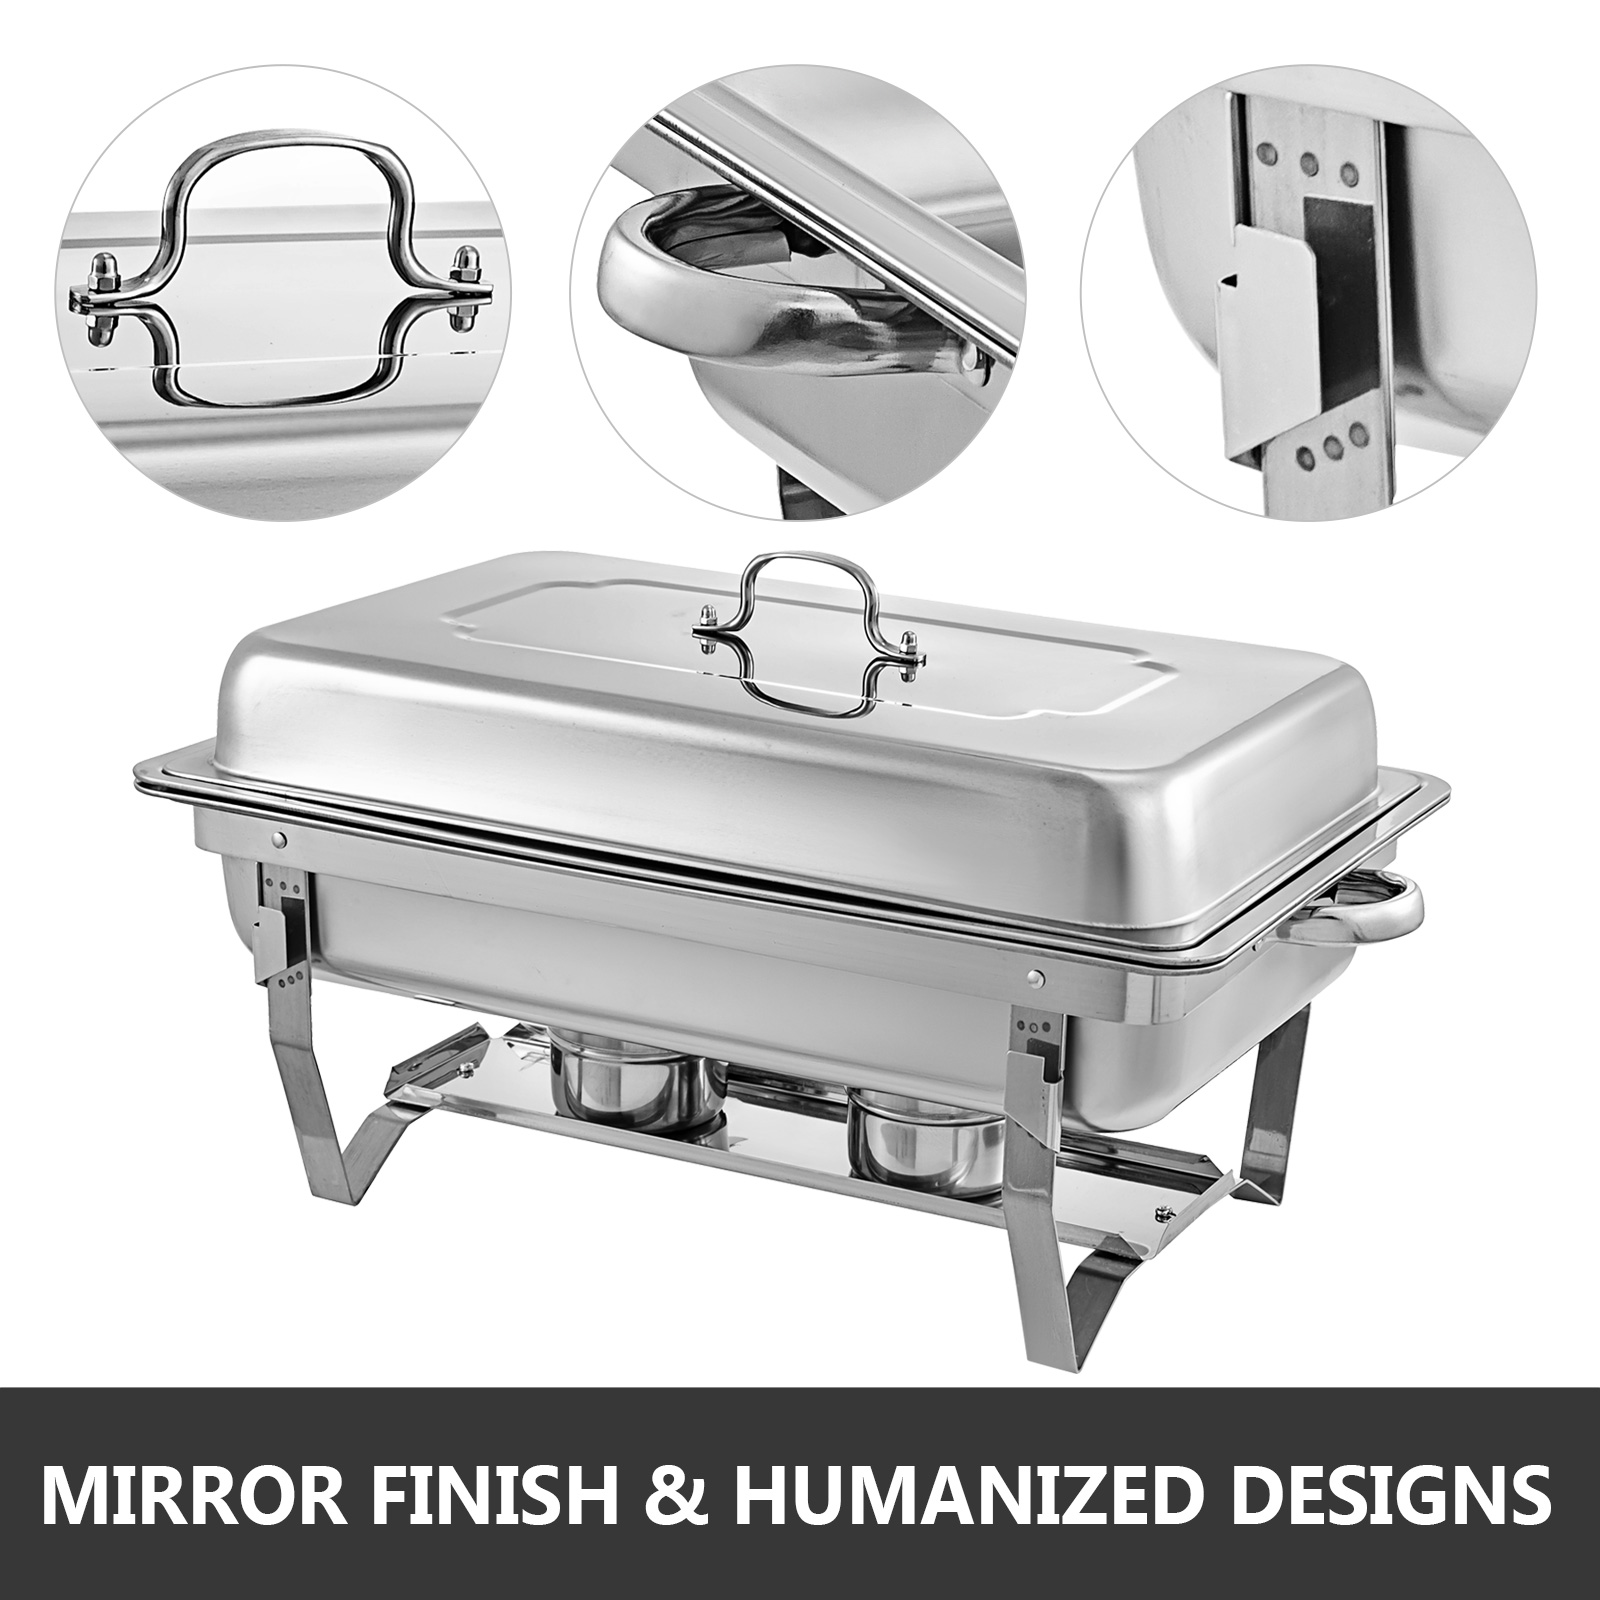 6 PACK CATERING STAINLESS STEEL CHAFER CHAFING DISH SETS 8 QT FULL Size Buffet 